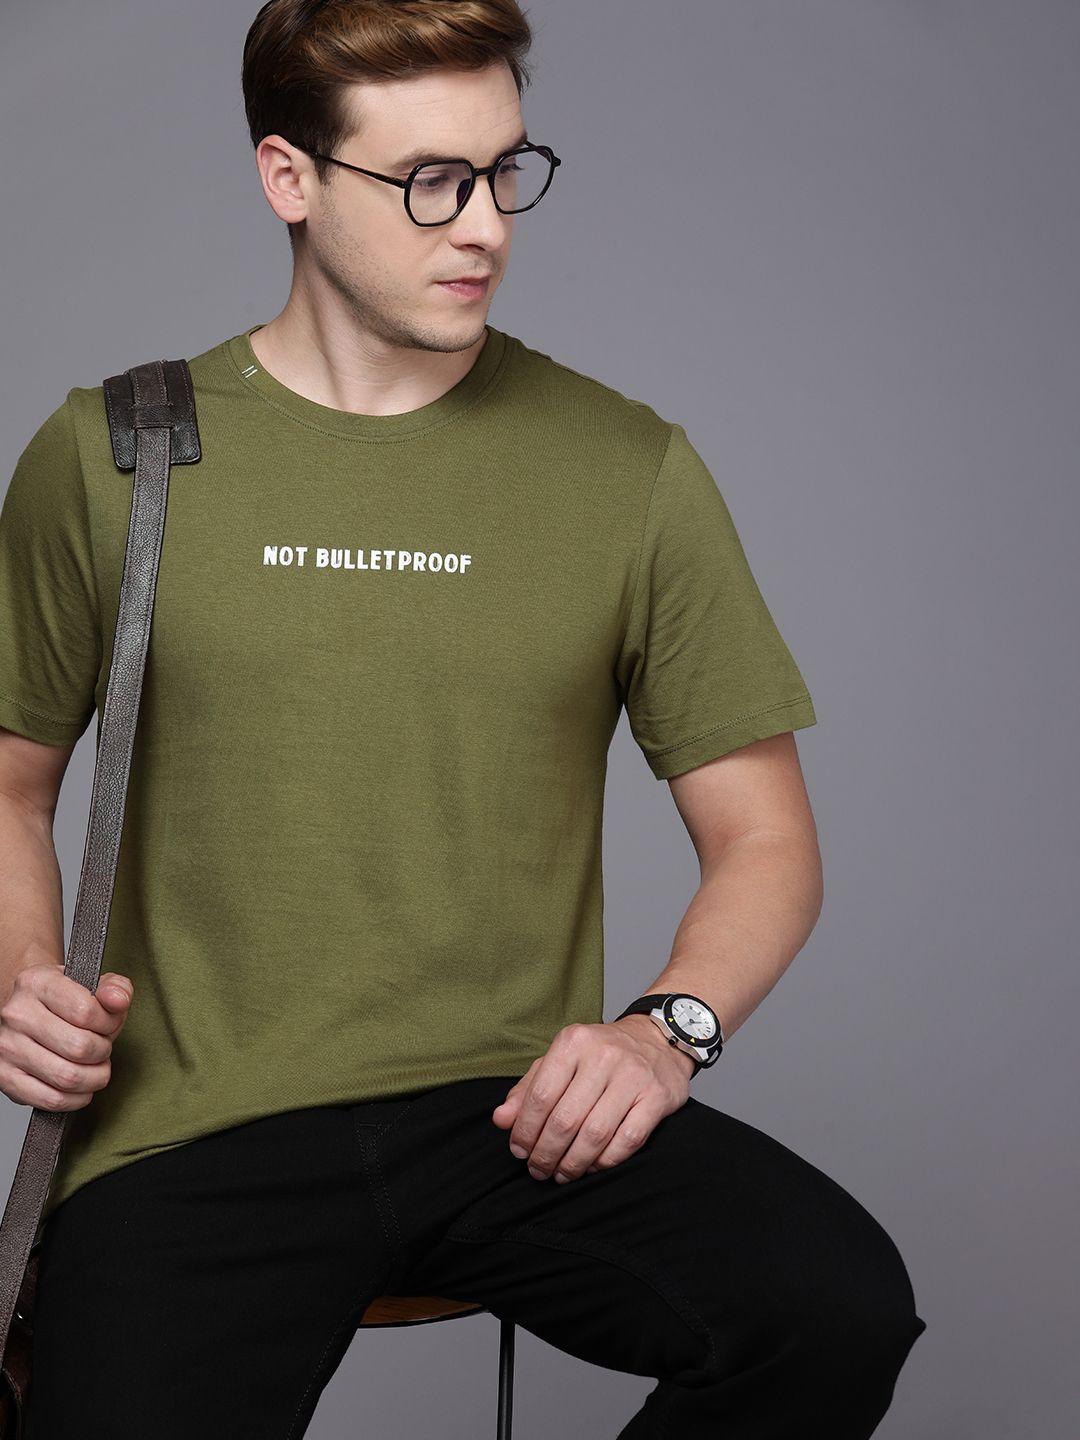 kenneth cole voice tee men olive green pure cotton typography printed t-shirt